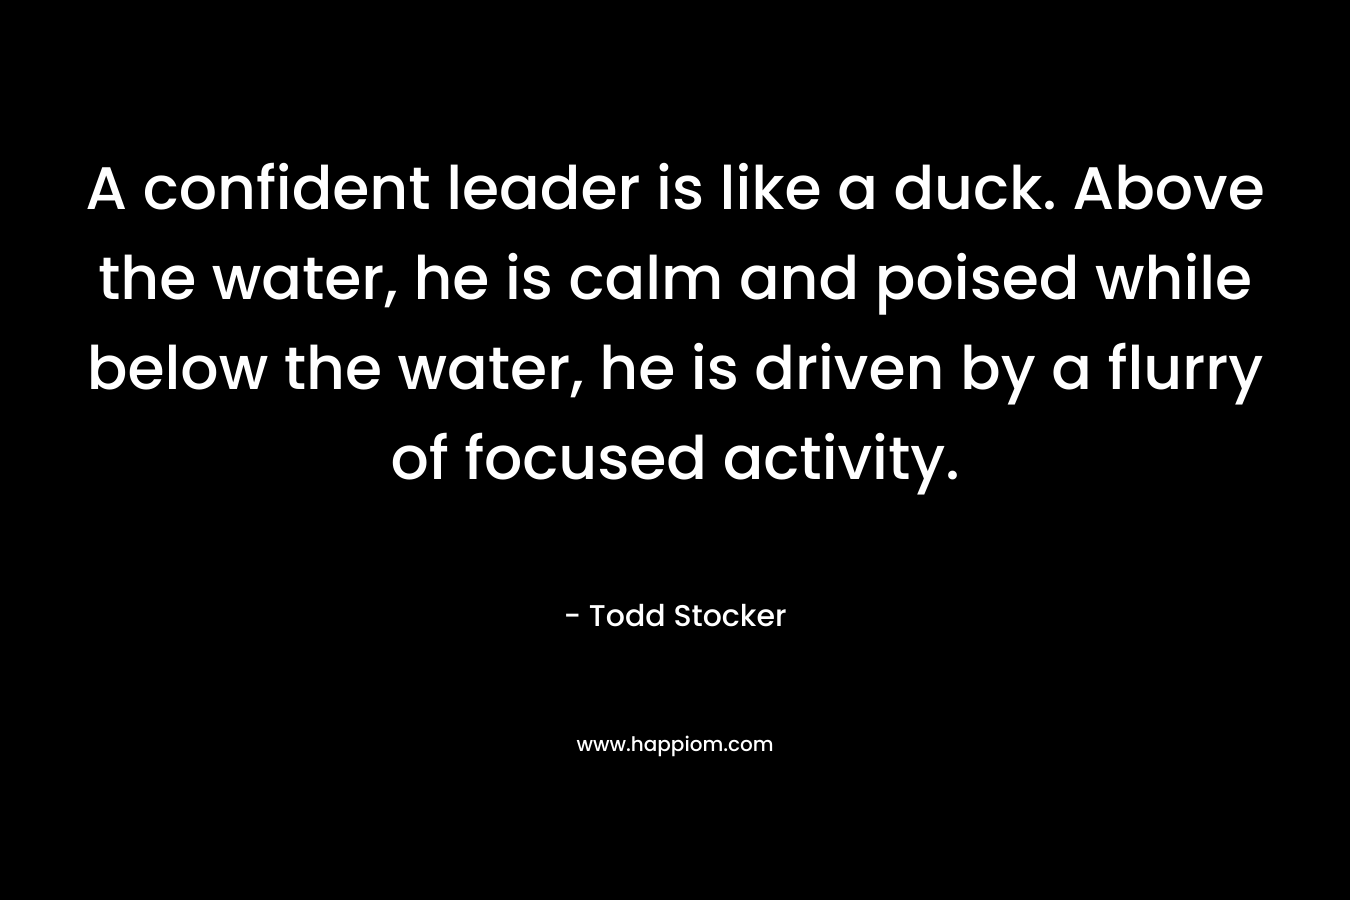 A confident leader is like a duck. Above the water, he is calm and poised while below the water, he is driven by a flurry of focused activity.